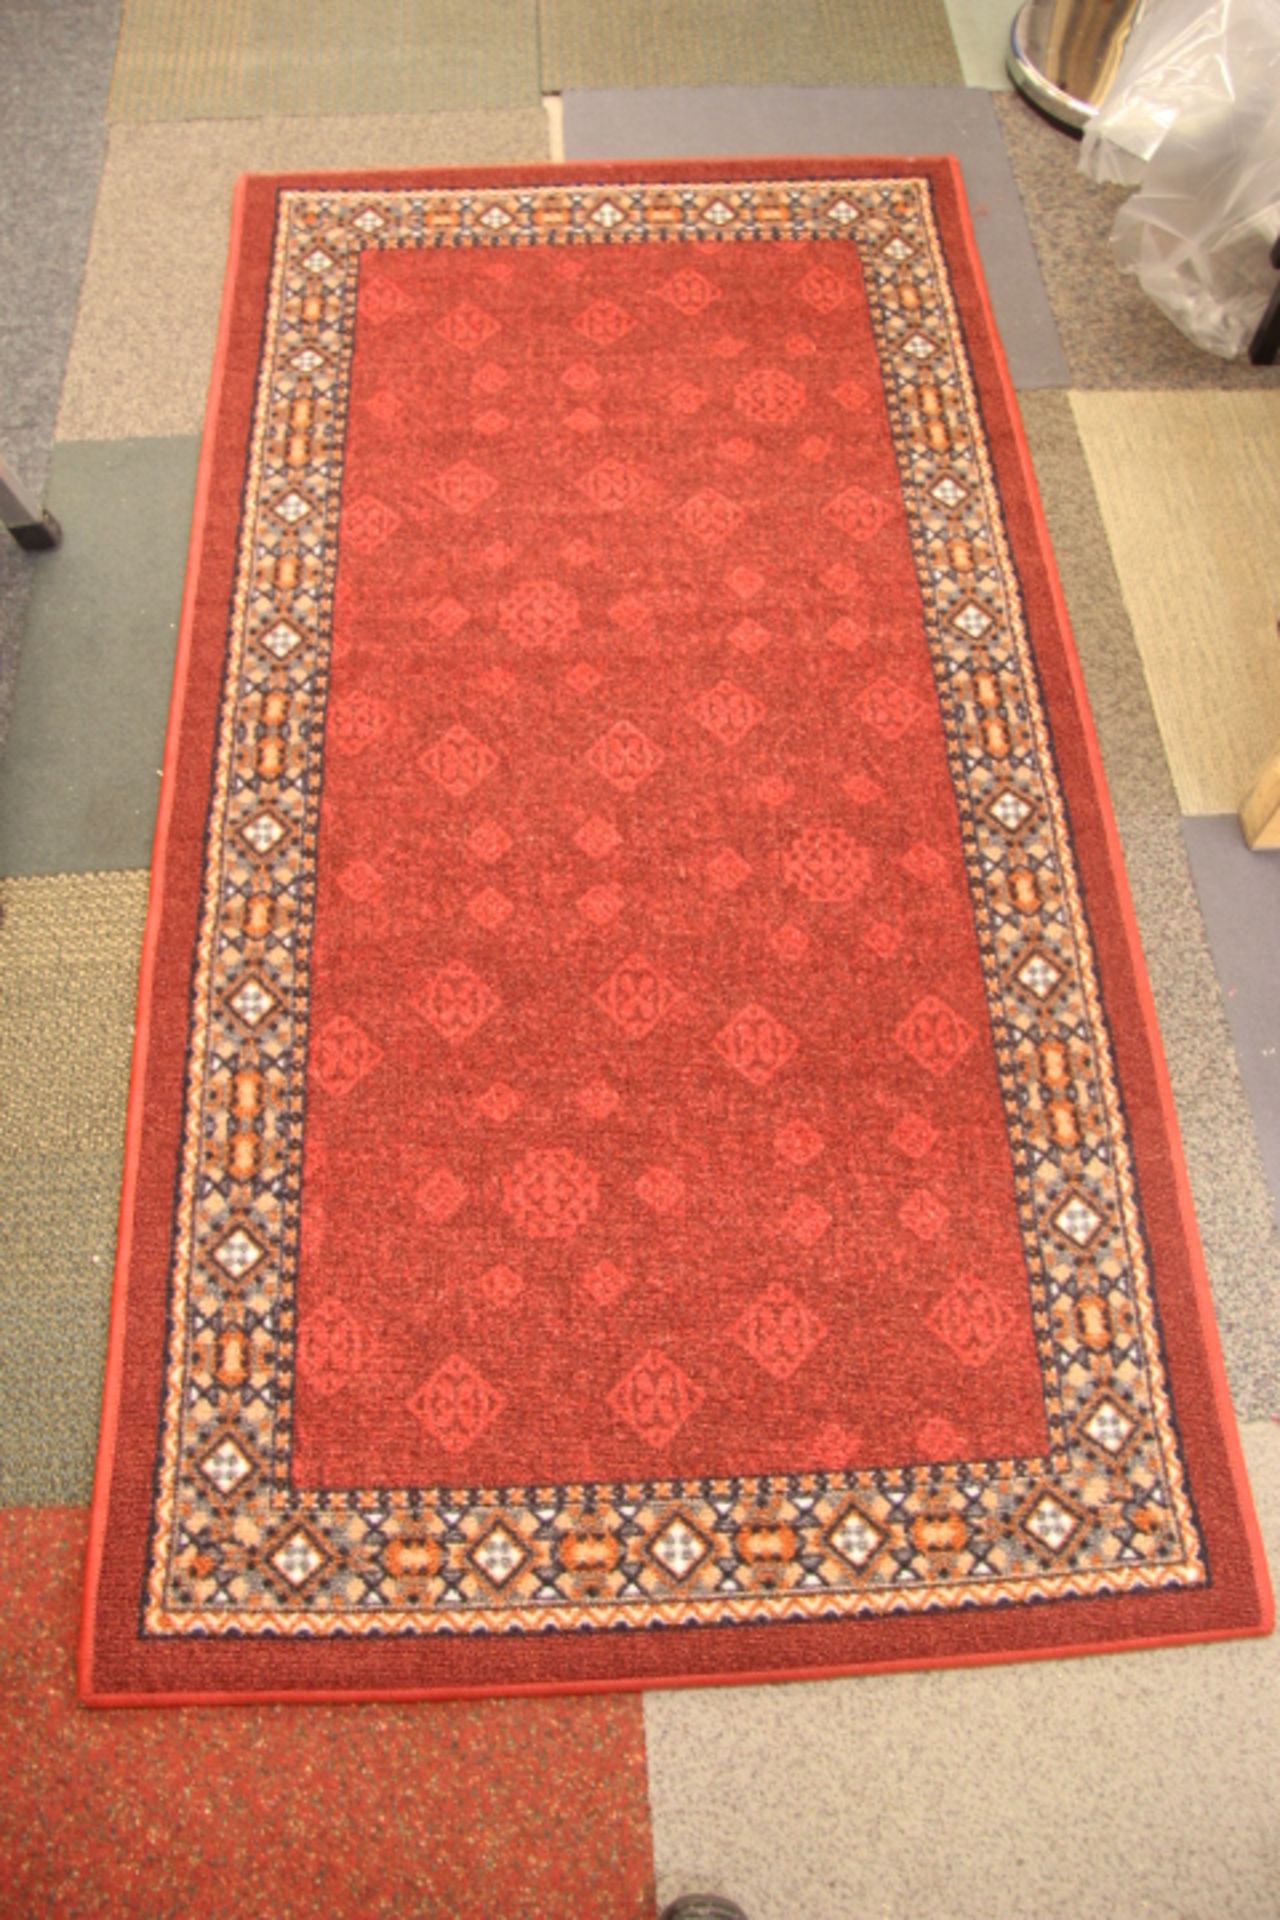 V *TRADE QTY* Brand New 80 X 150cm Burgundy Decorative Rug X 4 YOUR BID PRICE TO BE MULTIPLIED BY